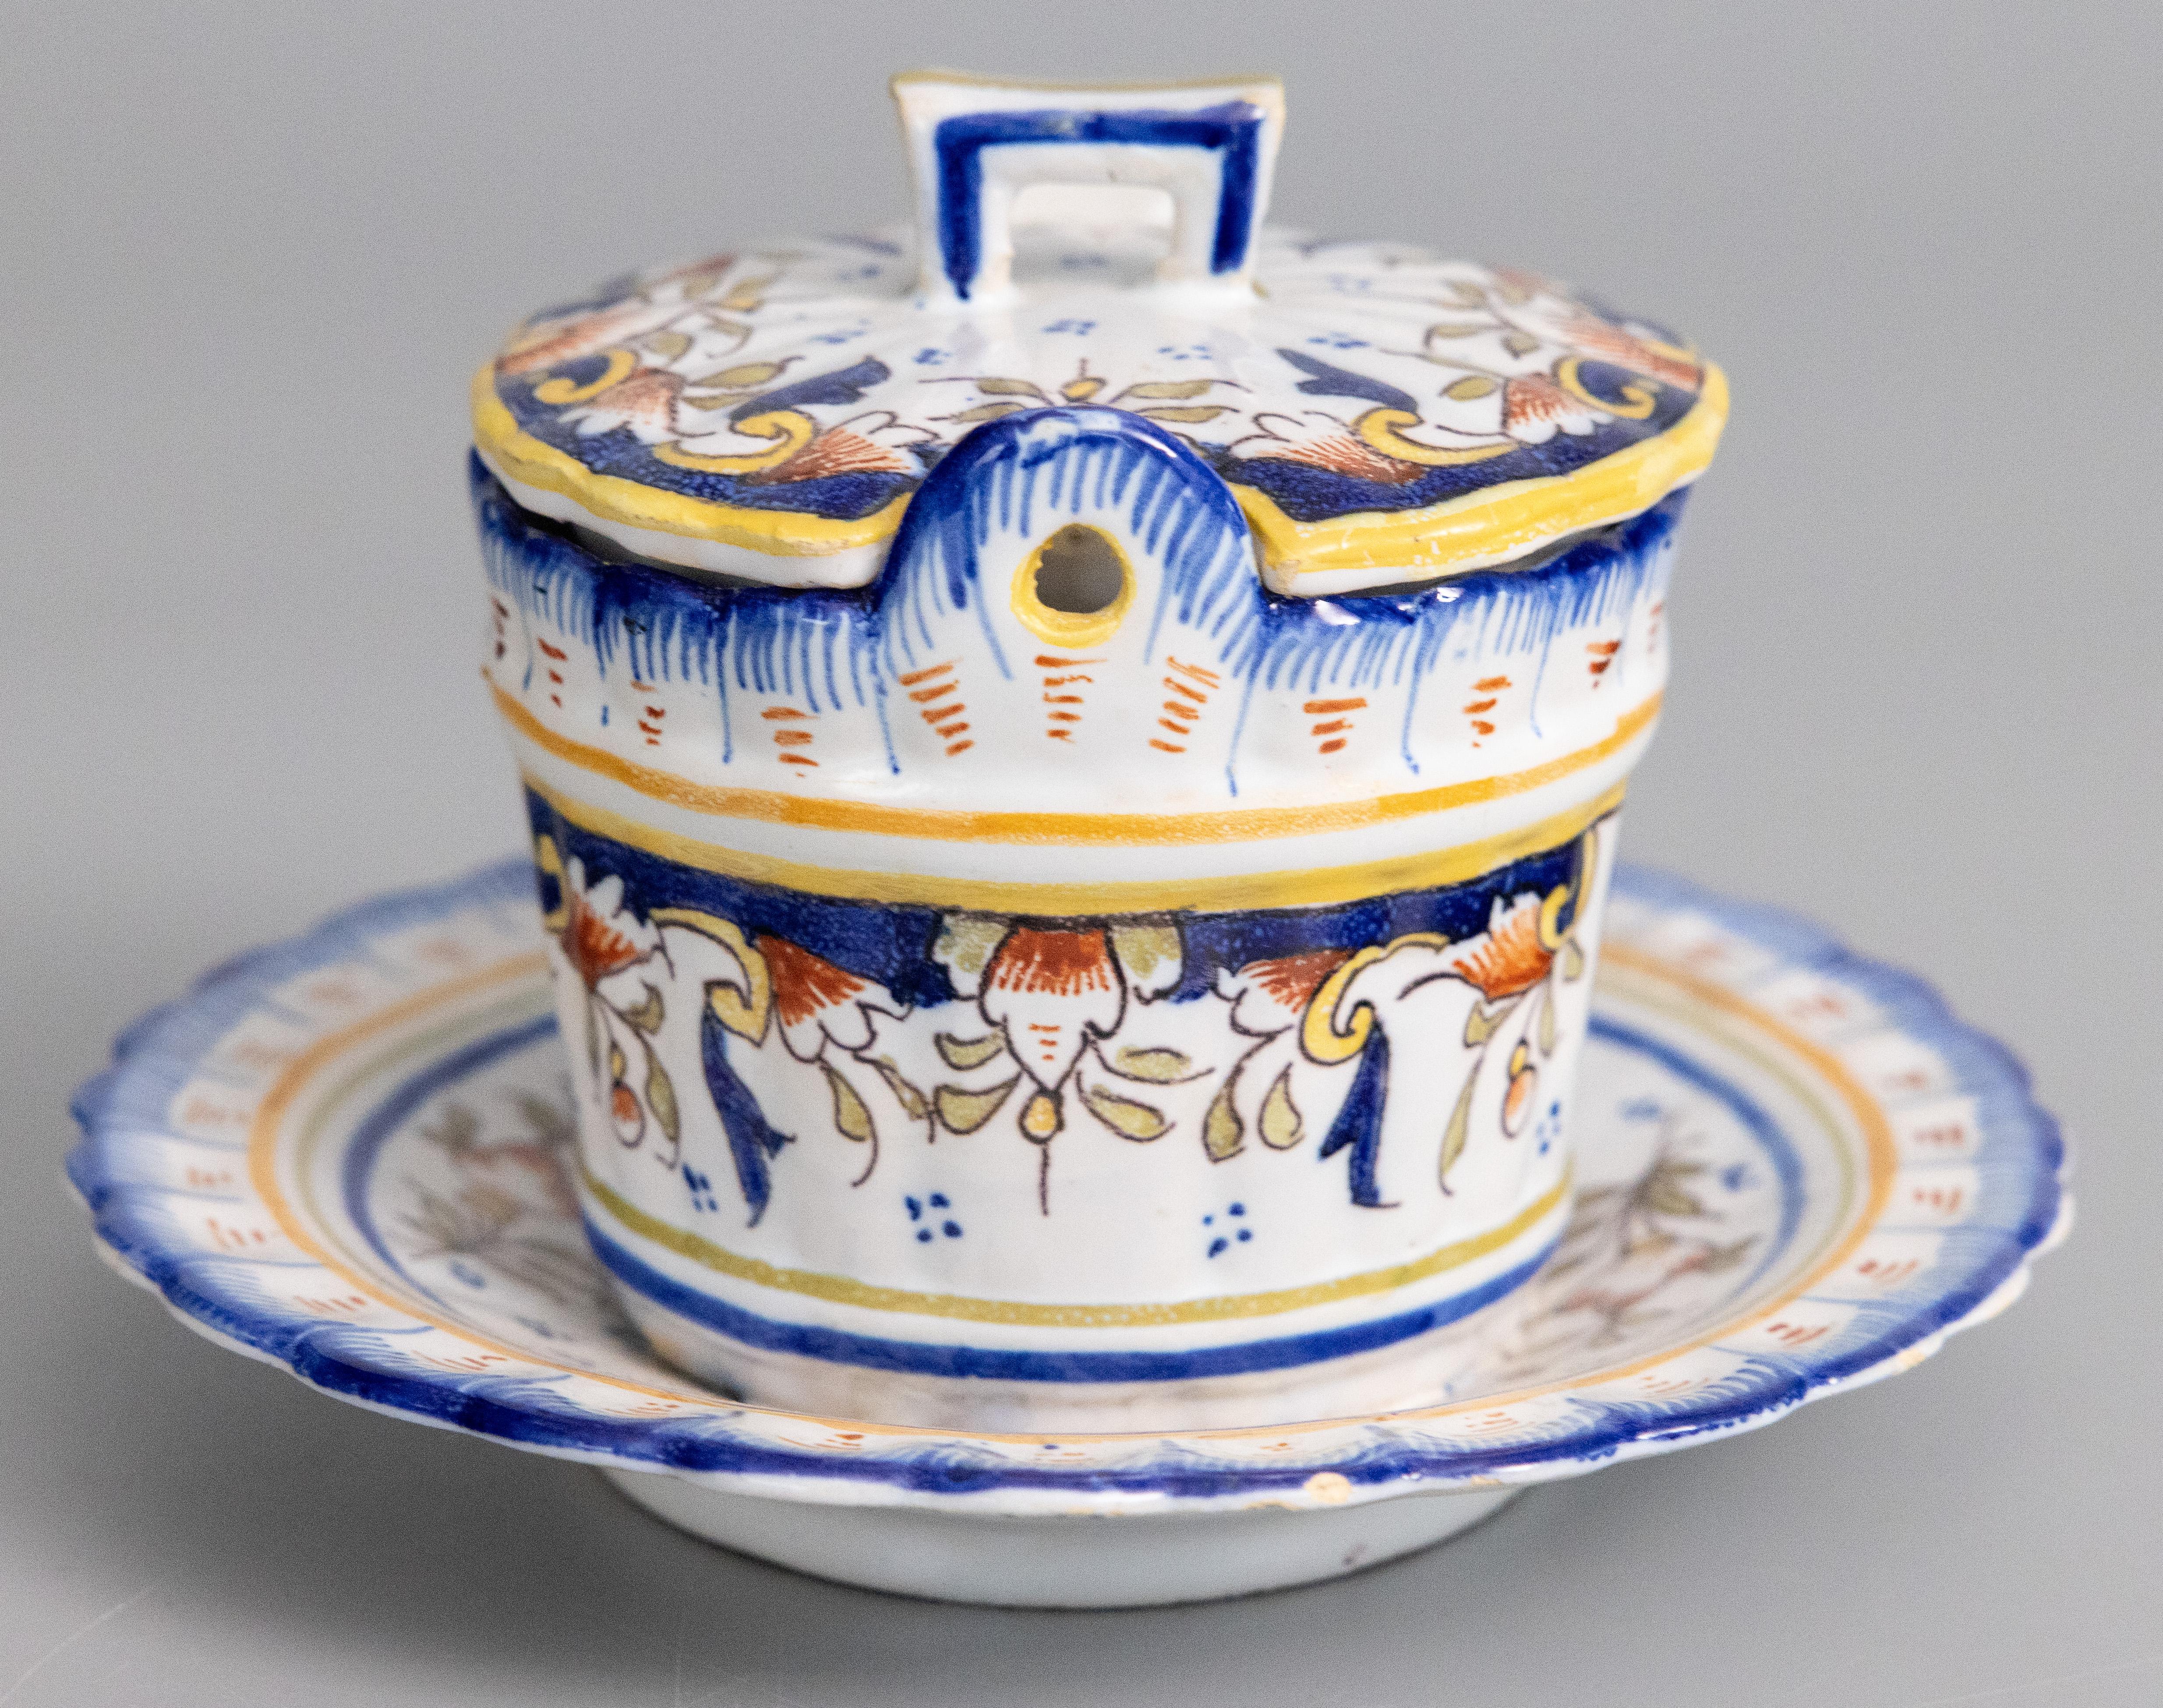 A superb antique French faience Desvres lidded butter bowl dish tureen with attached underplate, circa 1900. Maker's mark on reverse. This charming dish has lovely scalloped edges, a hand painted armorial crest, and floral decoration in the